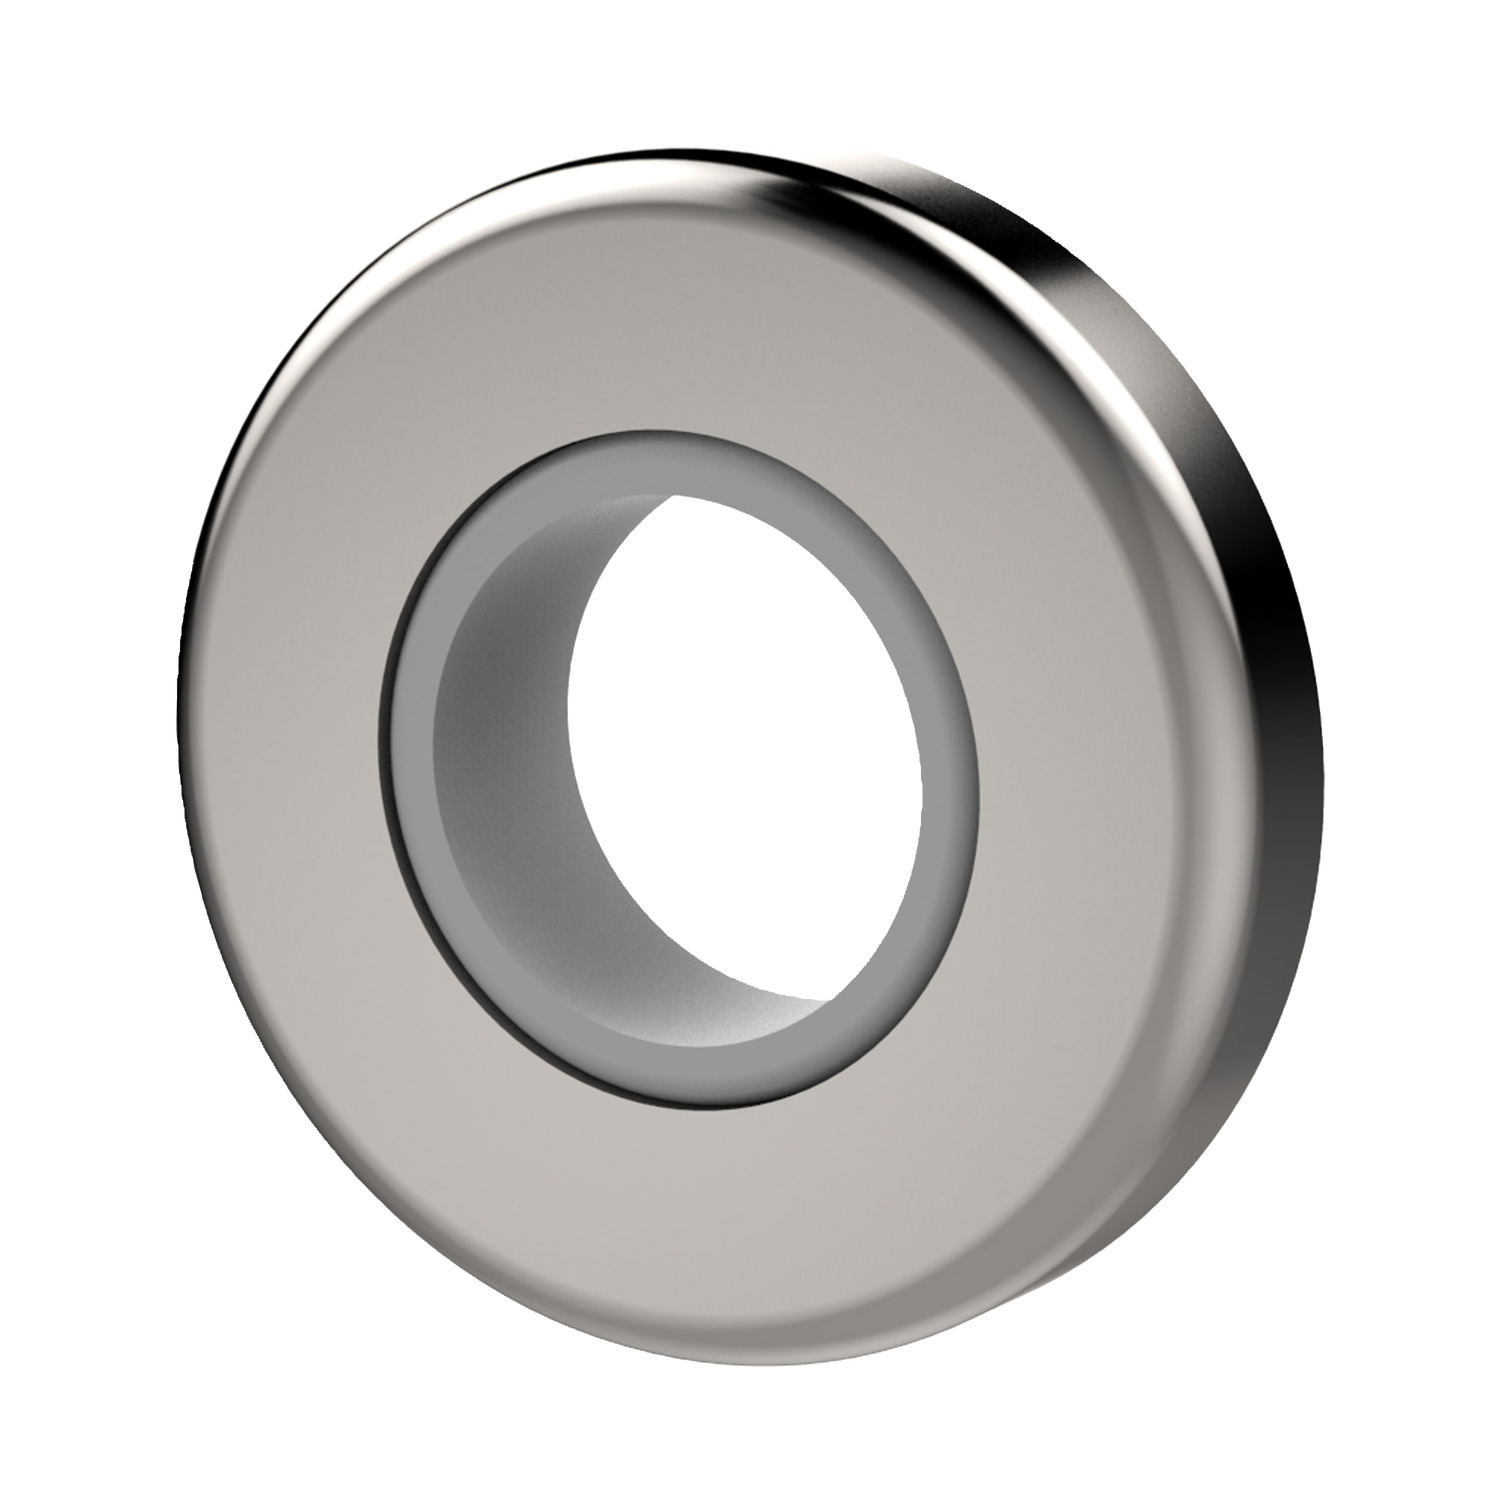 36637.W0160 Pressure-rated sealing washer - M16x16,1 A2 stainless steel